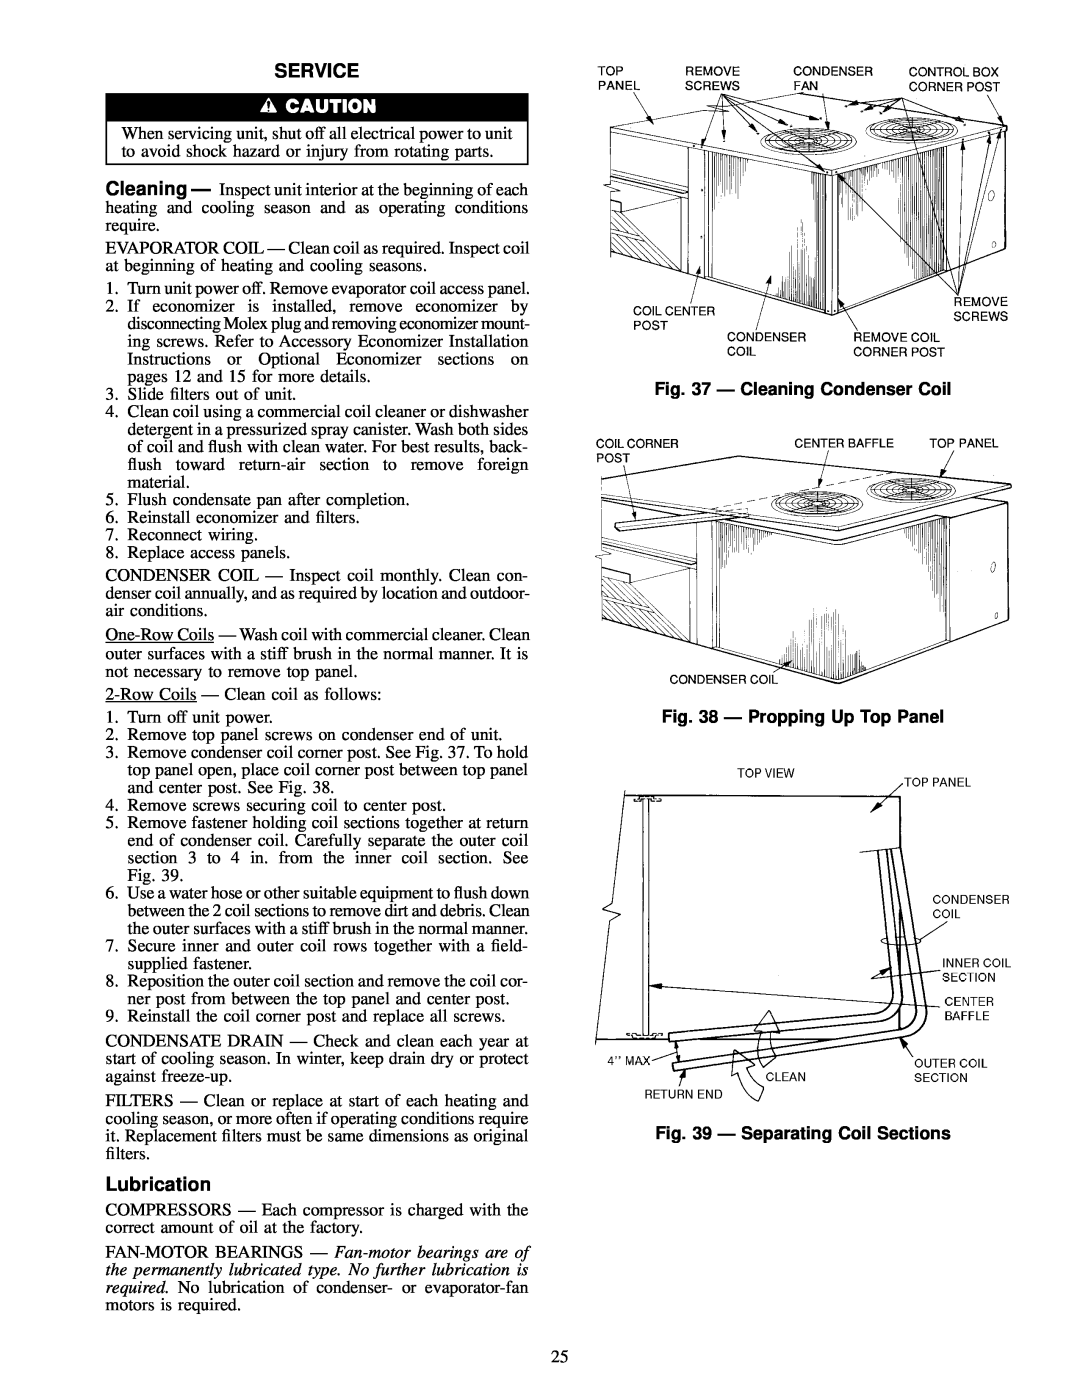 Carrier 48TJD008-014 Service, Lubrication, Ð Cleaning Condenser Coil, Ð Propping Up Top Panel, Ð Separating Coil Sections 